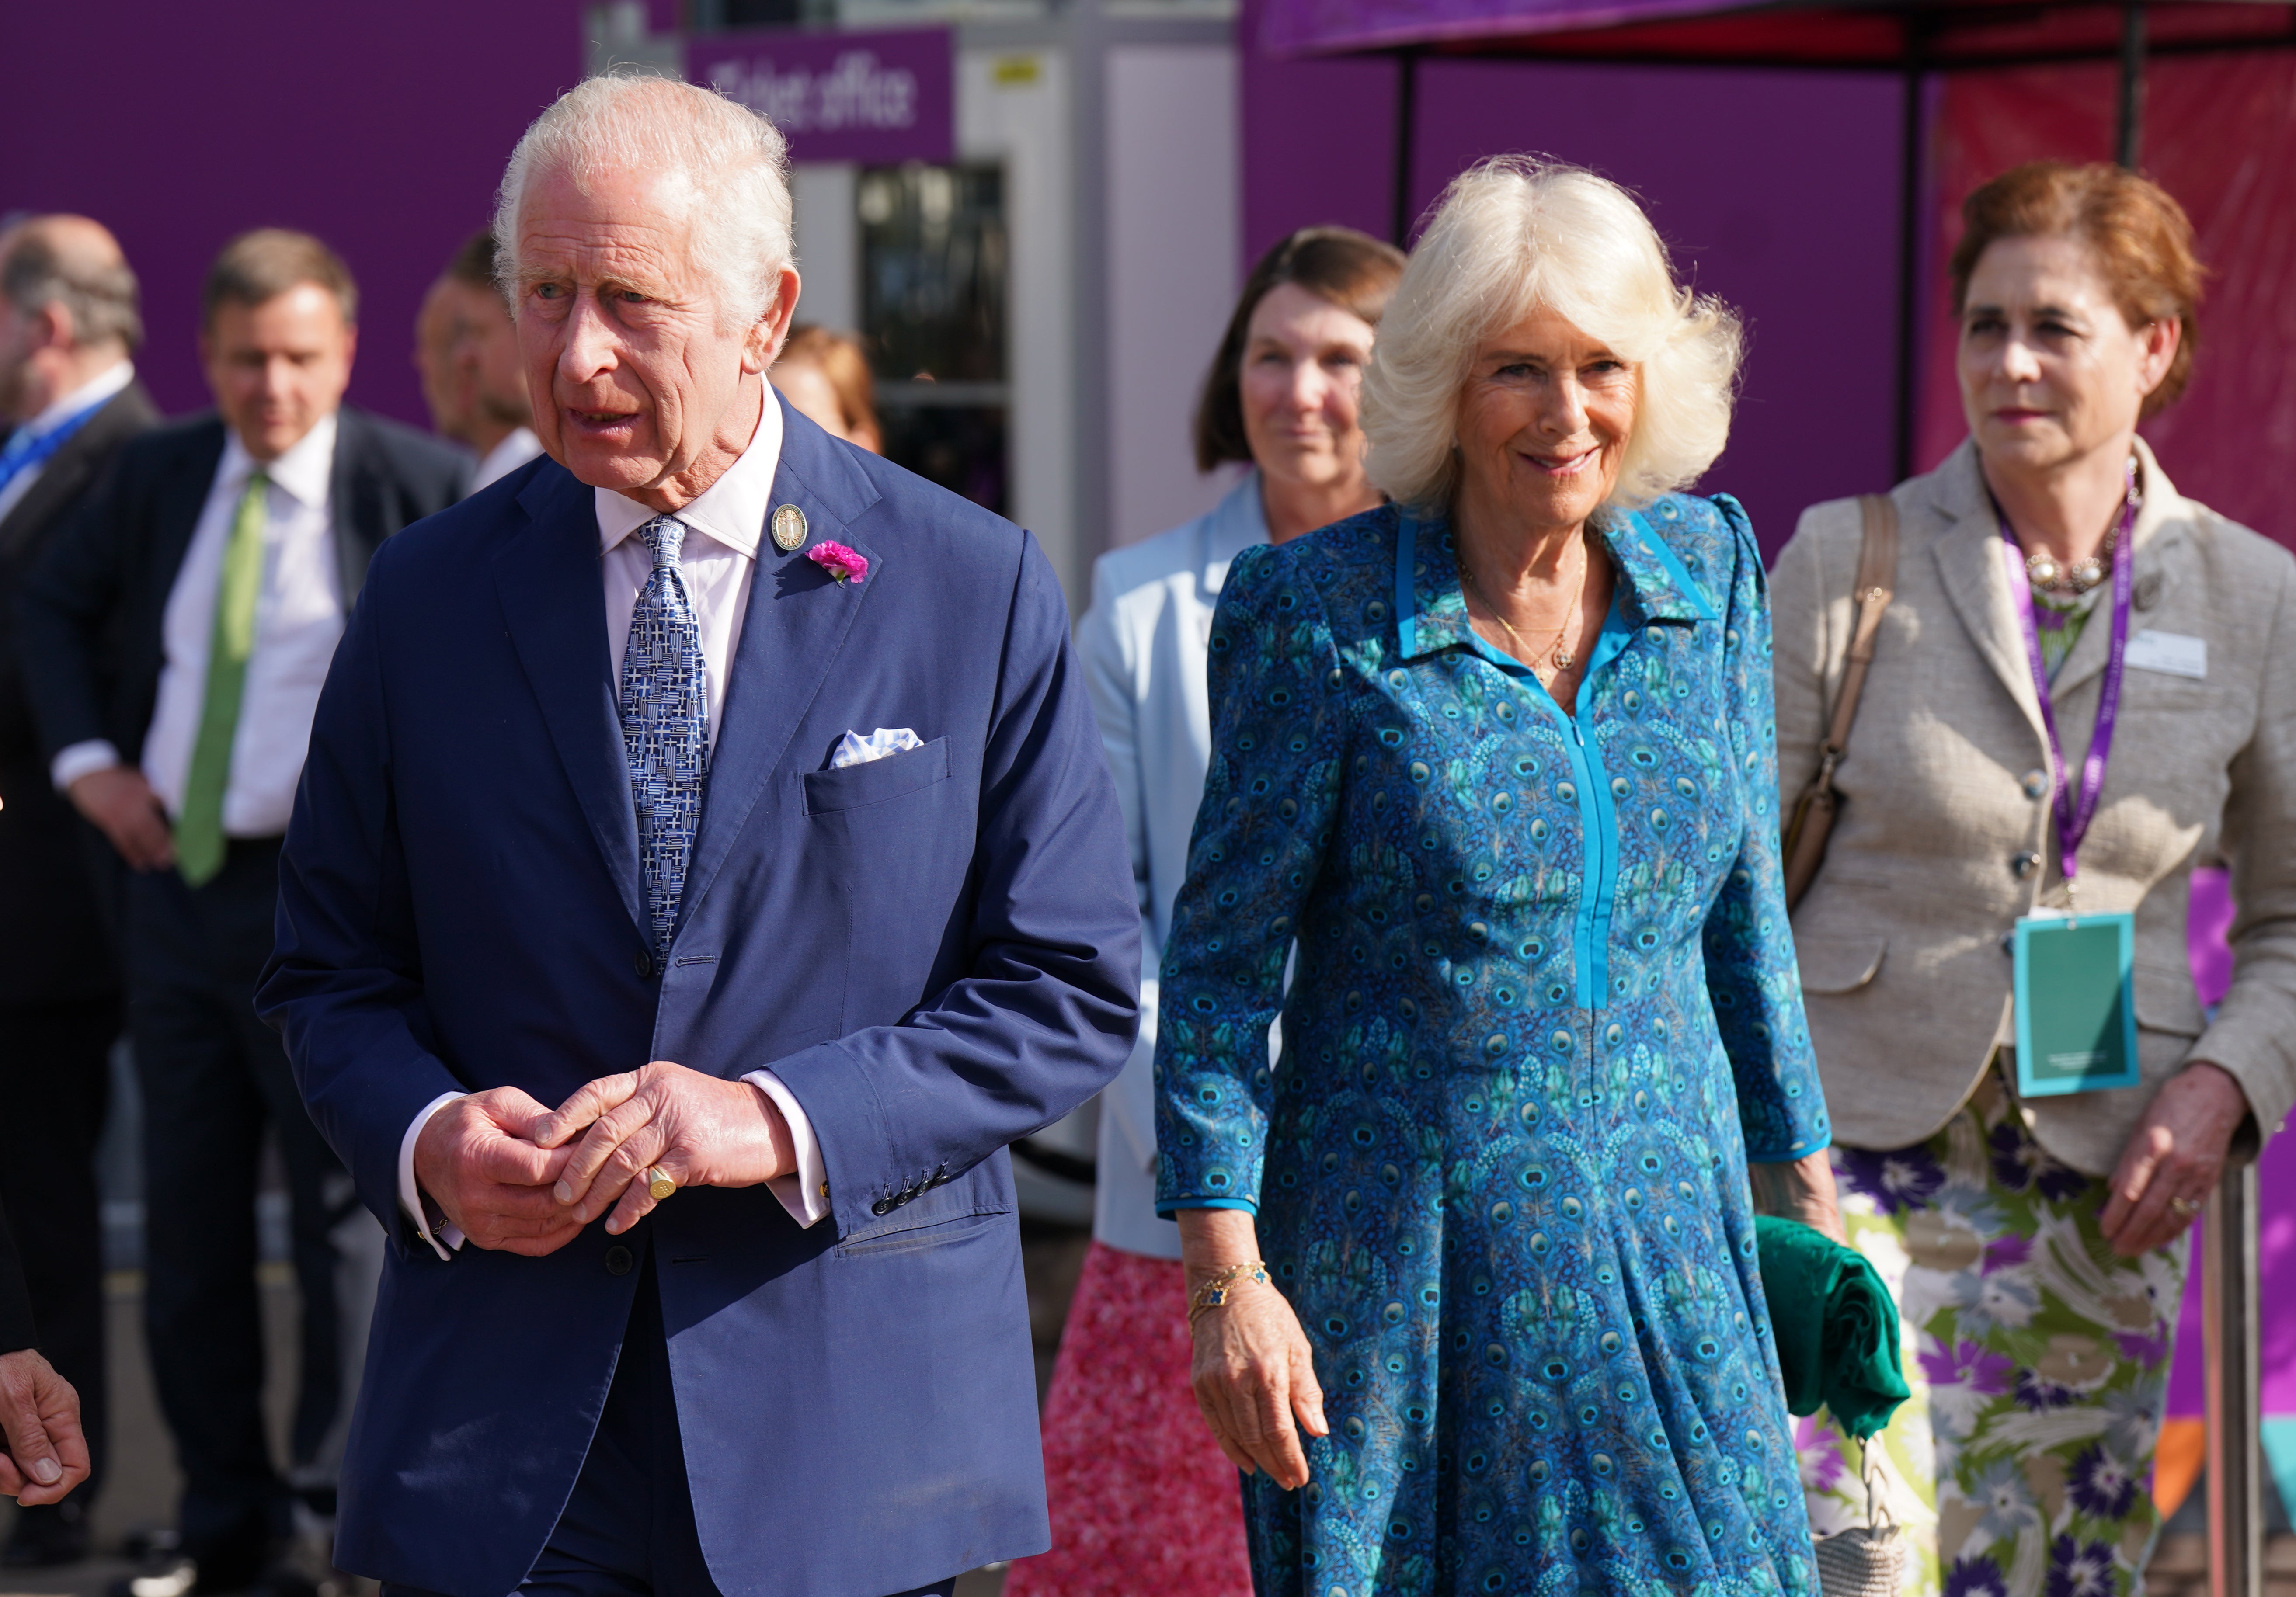 The King and Queen were given new nicknames at the Chelsea Flower Show